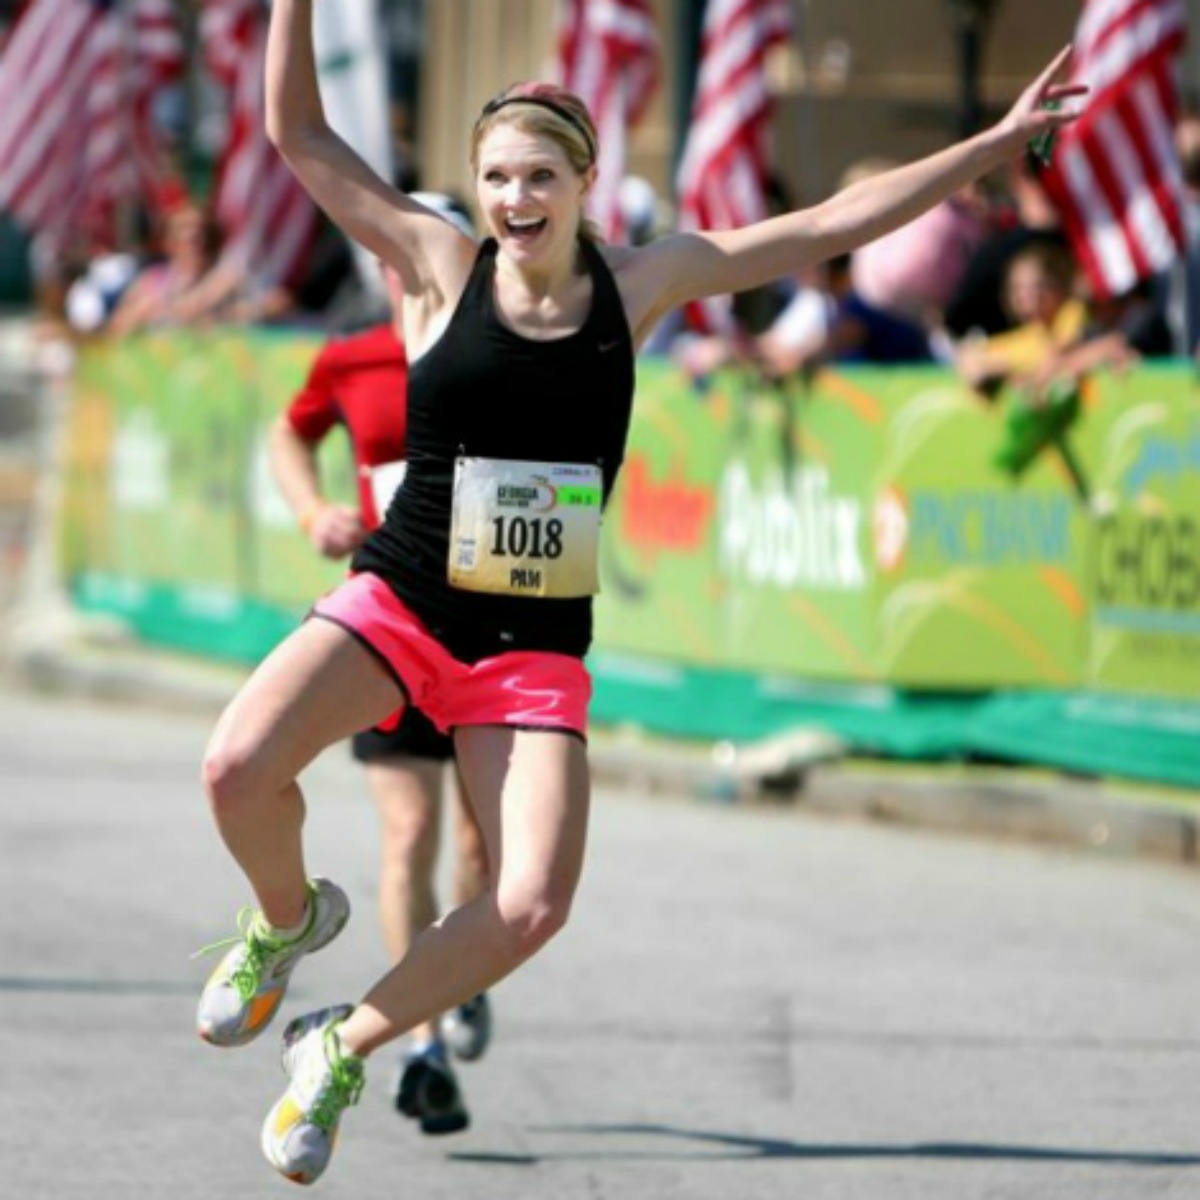 female runner in a black shirt &  pink shorts jumping at the finish line of a race